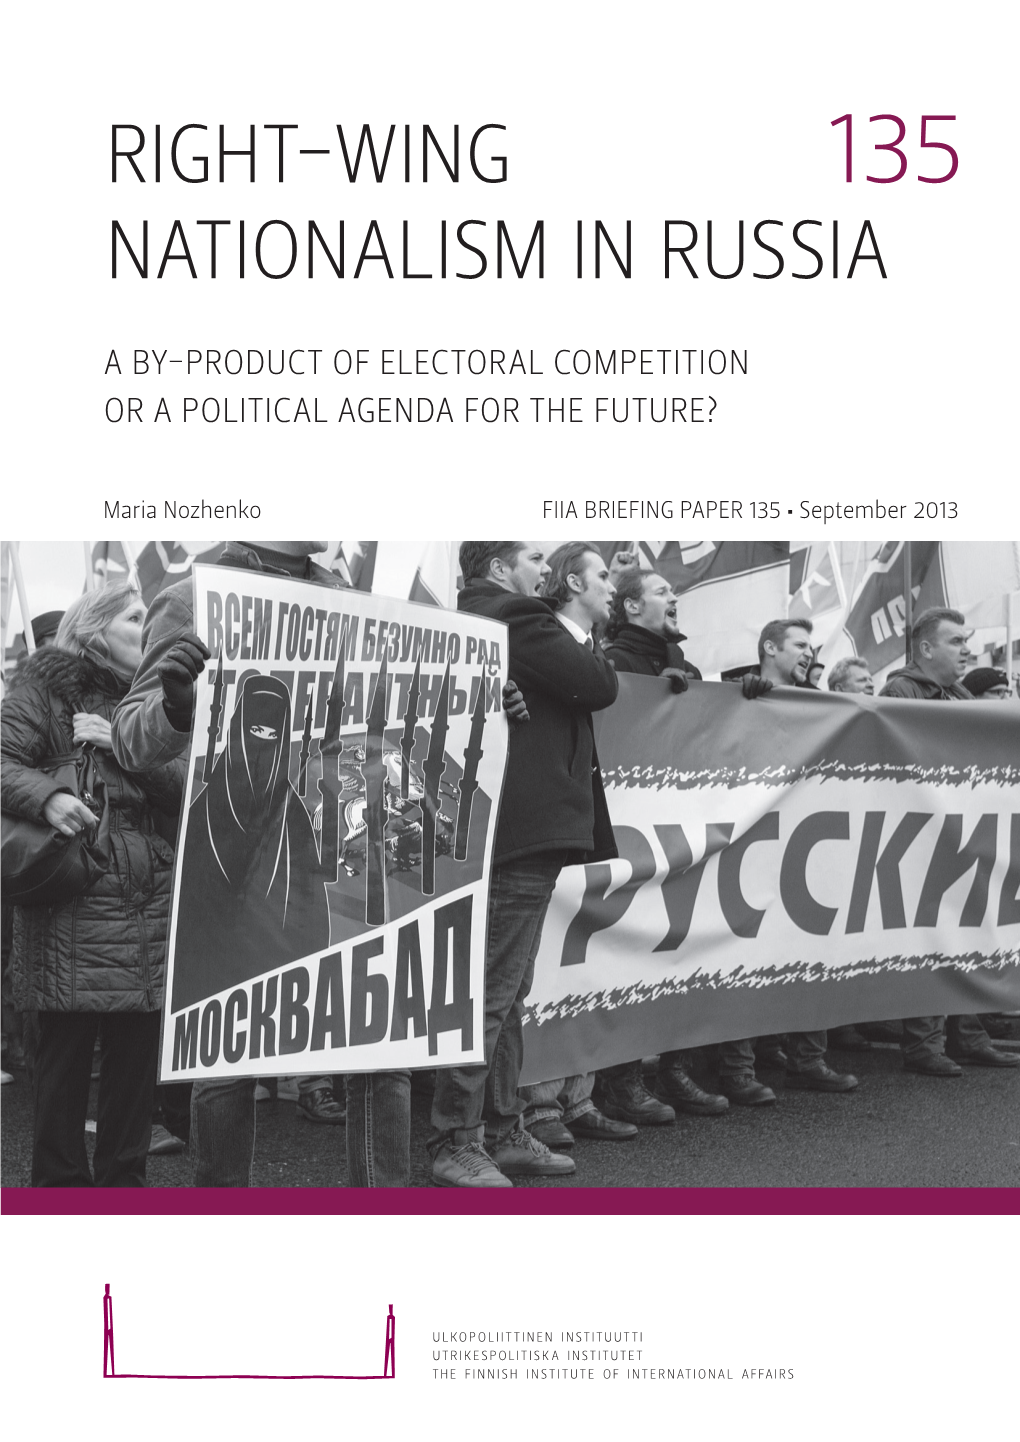 Right-Wing Nationalism in Russia a By-Product of Electoral Competition Or a Political Agenda for the Future?